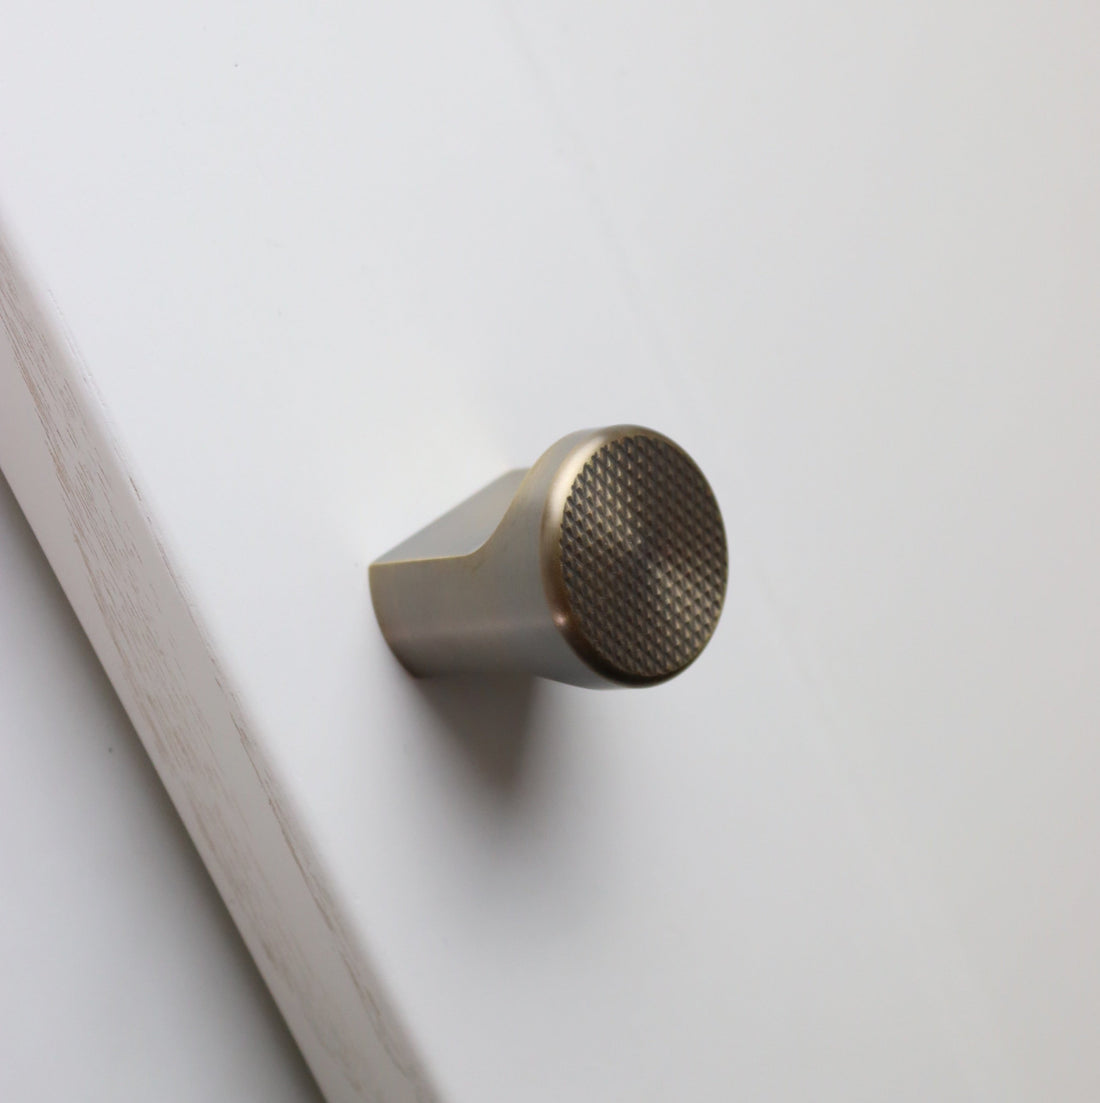 Boscastle (cornish town) knurled pull knob with structured curves. antique bronze 